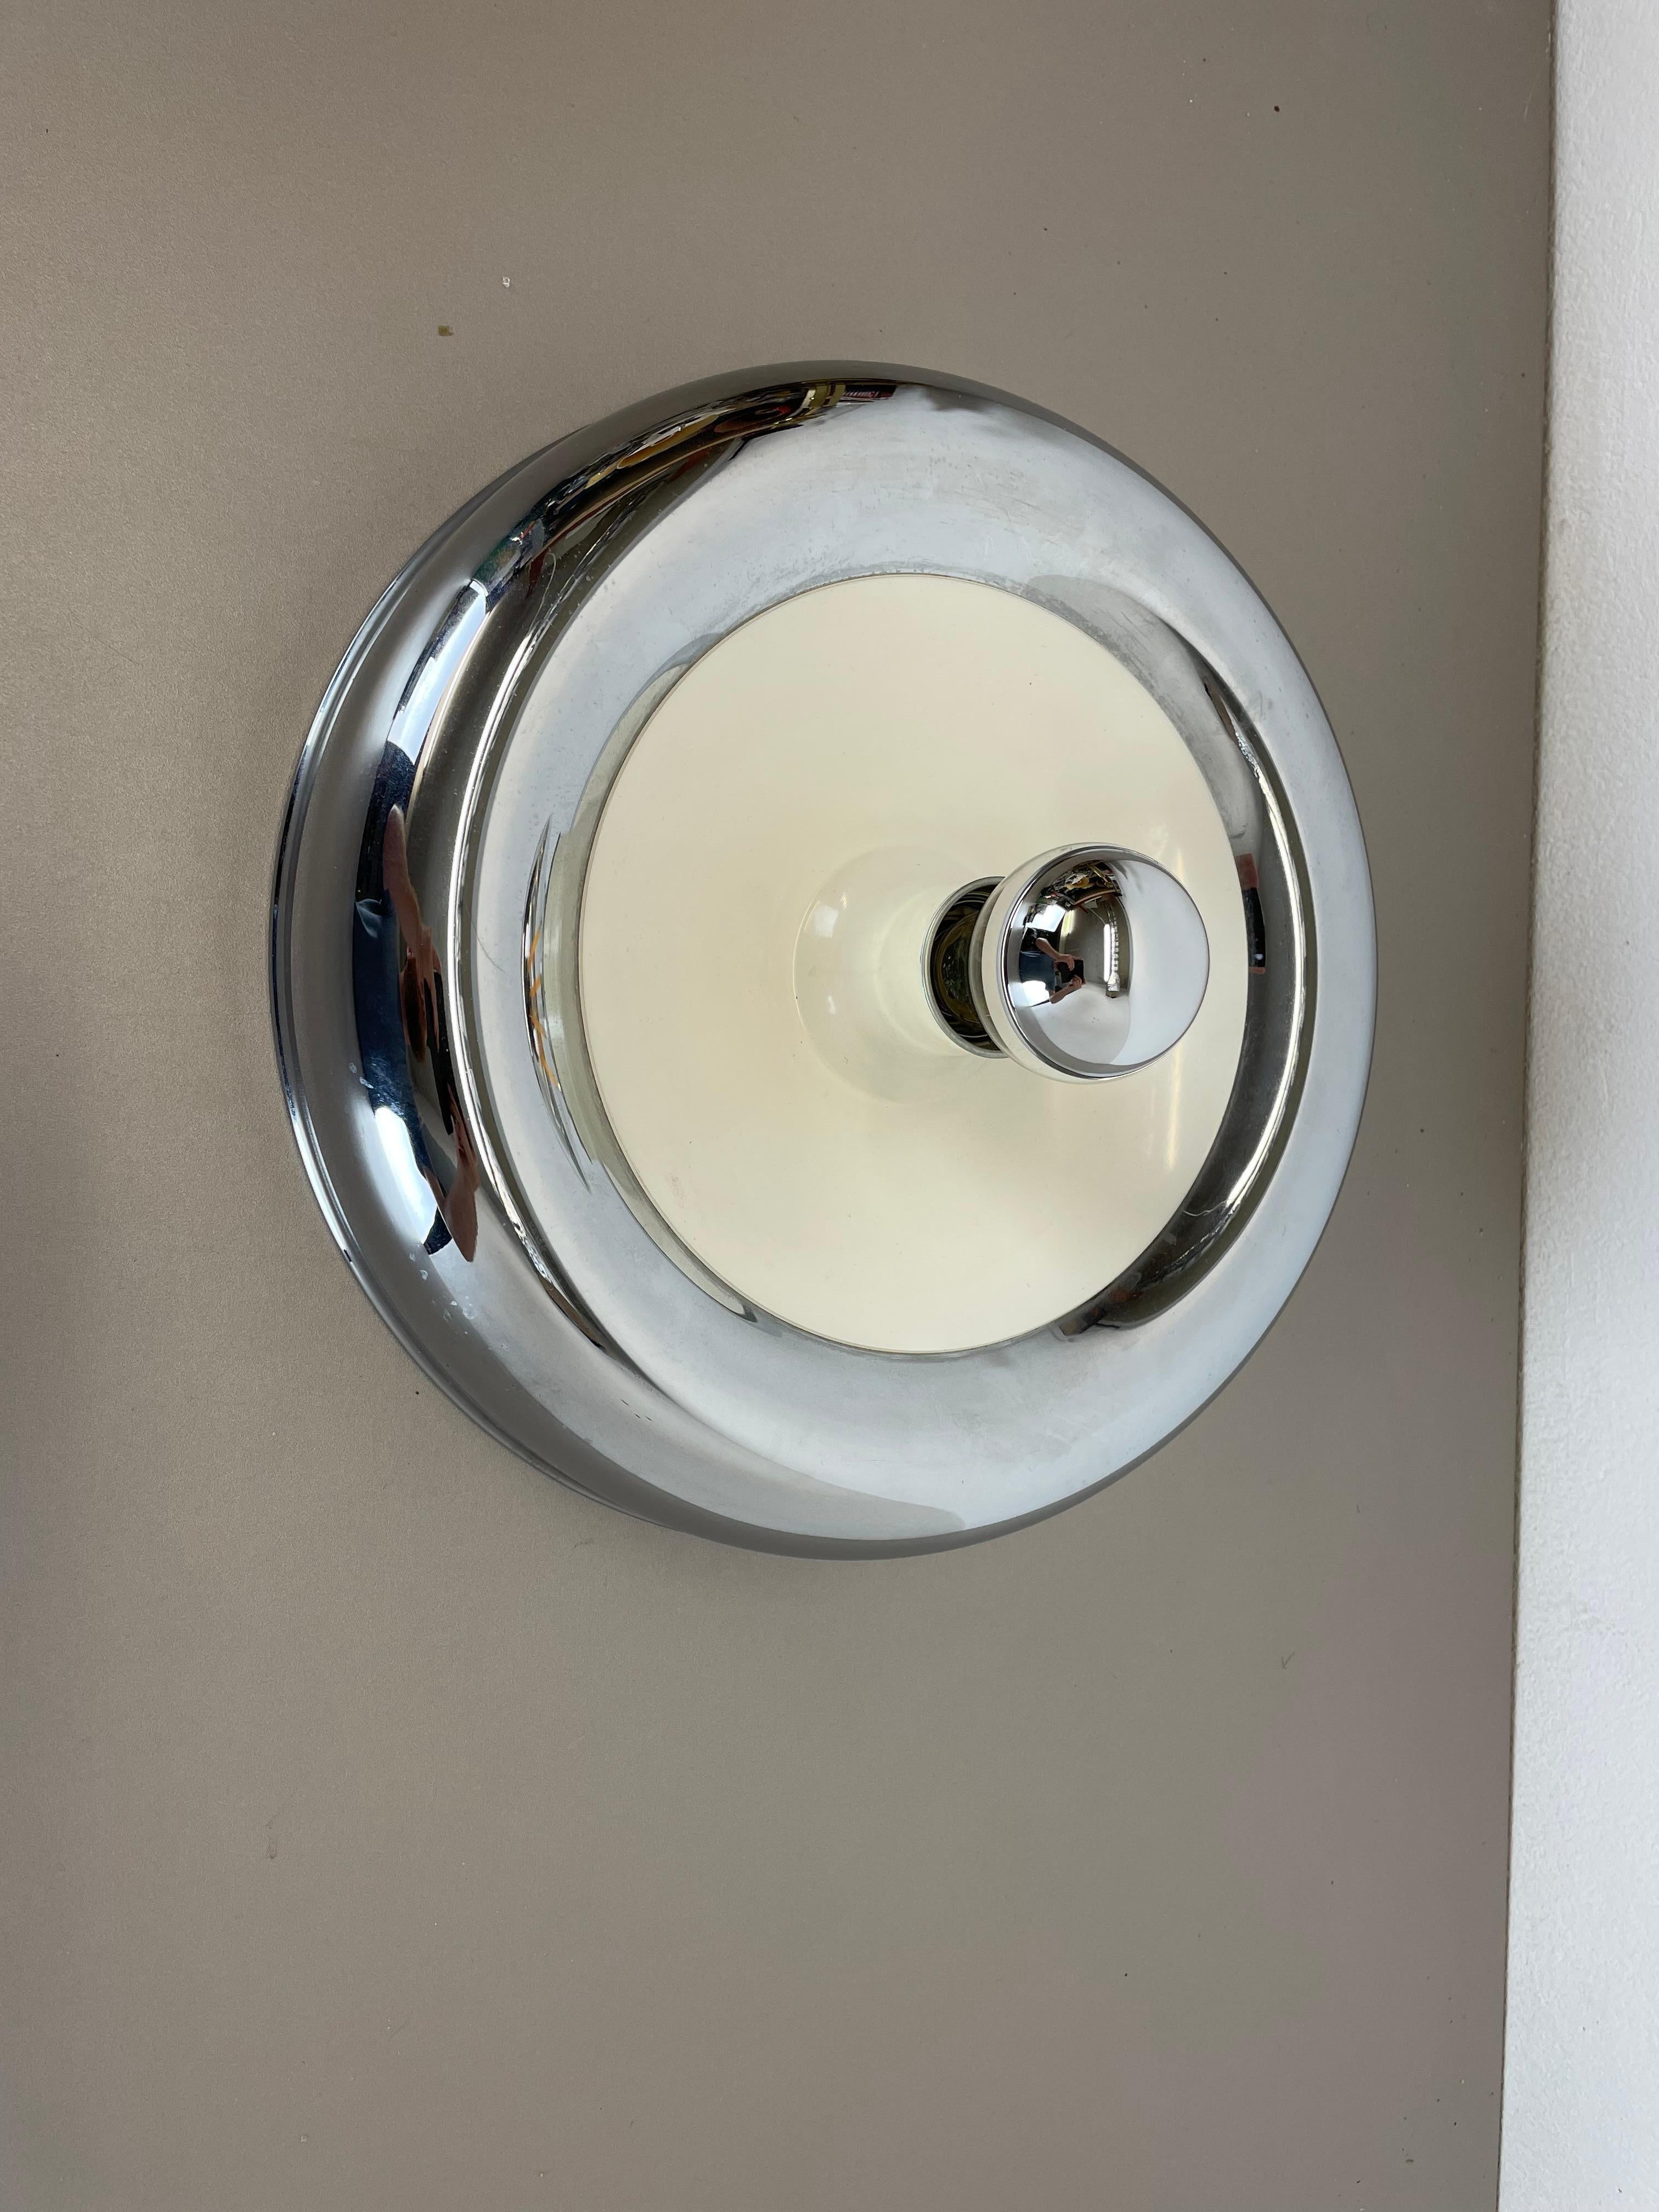 Article:

disc wall light sconce


Producer:

Sölken Leuchten



Origin:

Germany



Age:

1970s



Description:

Original 1970s modernist German wall light made of solid meta in chromed tone with a middle part on the front in white tone around the